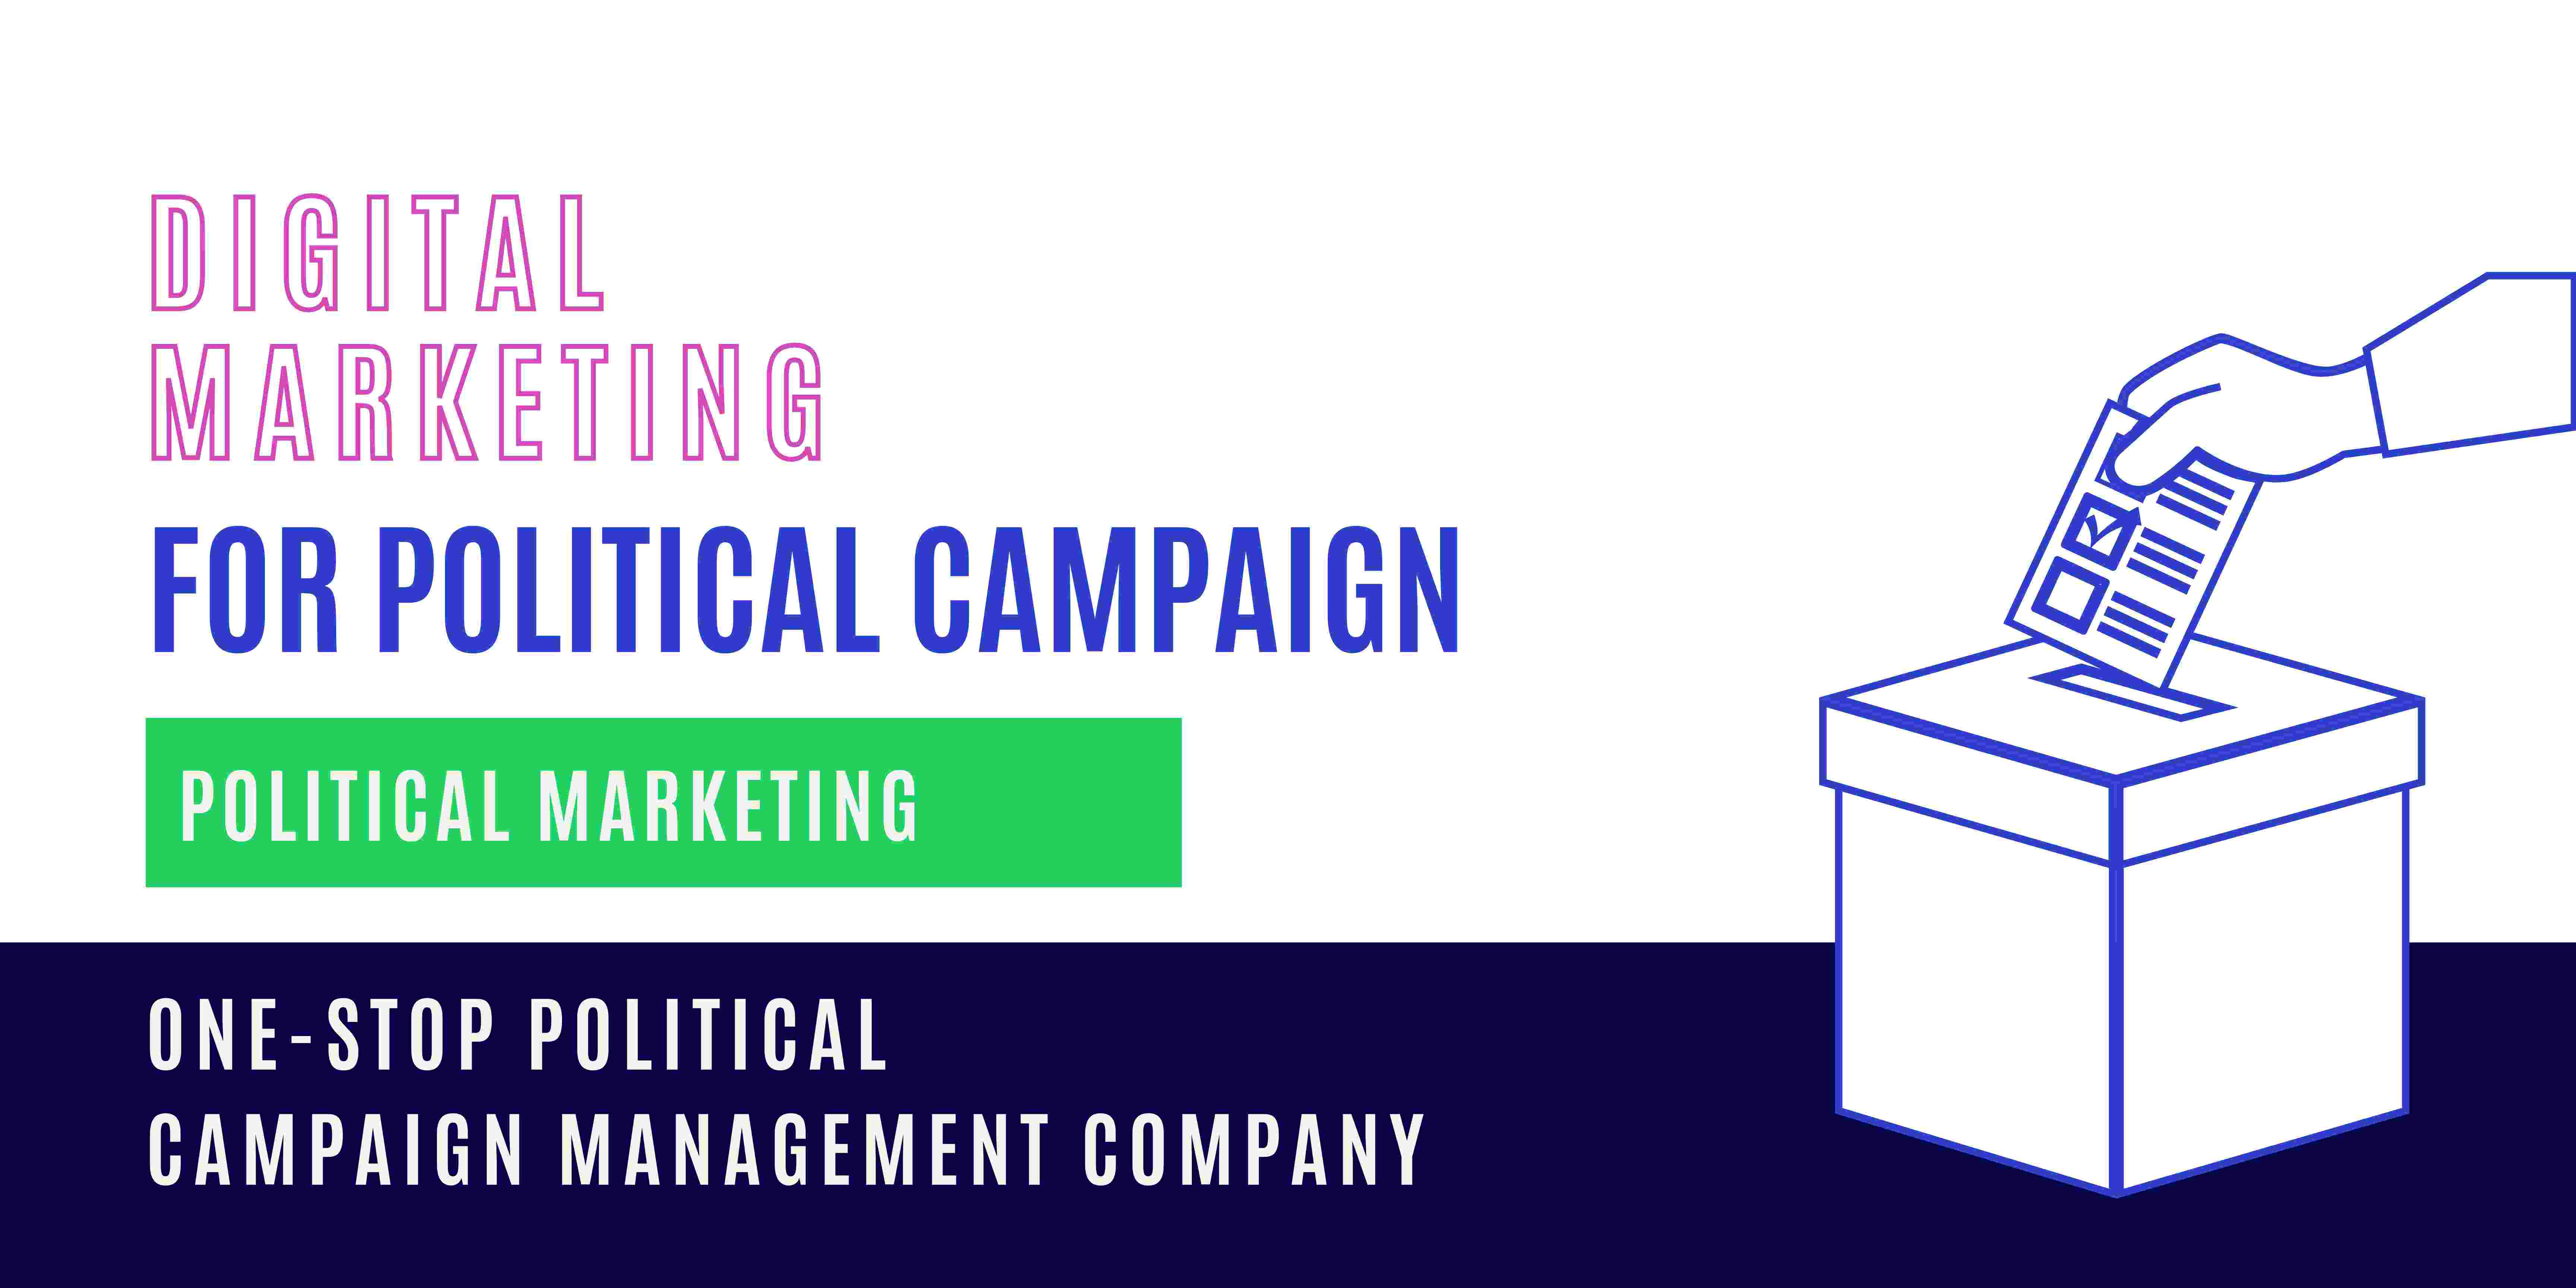 Online marketing for election campaign